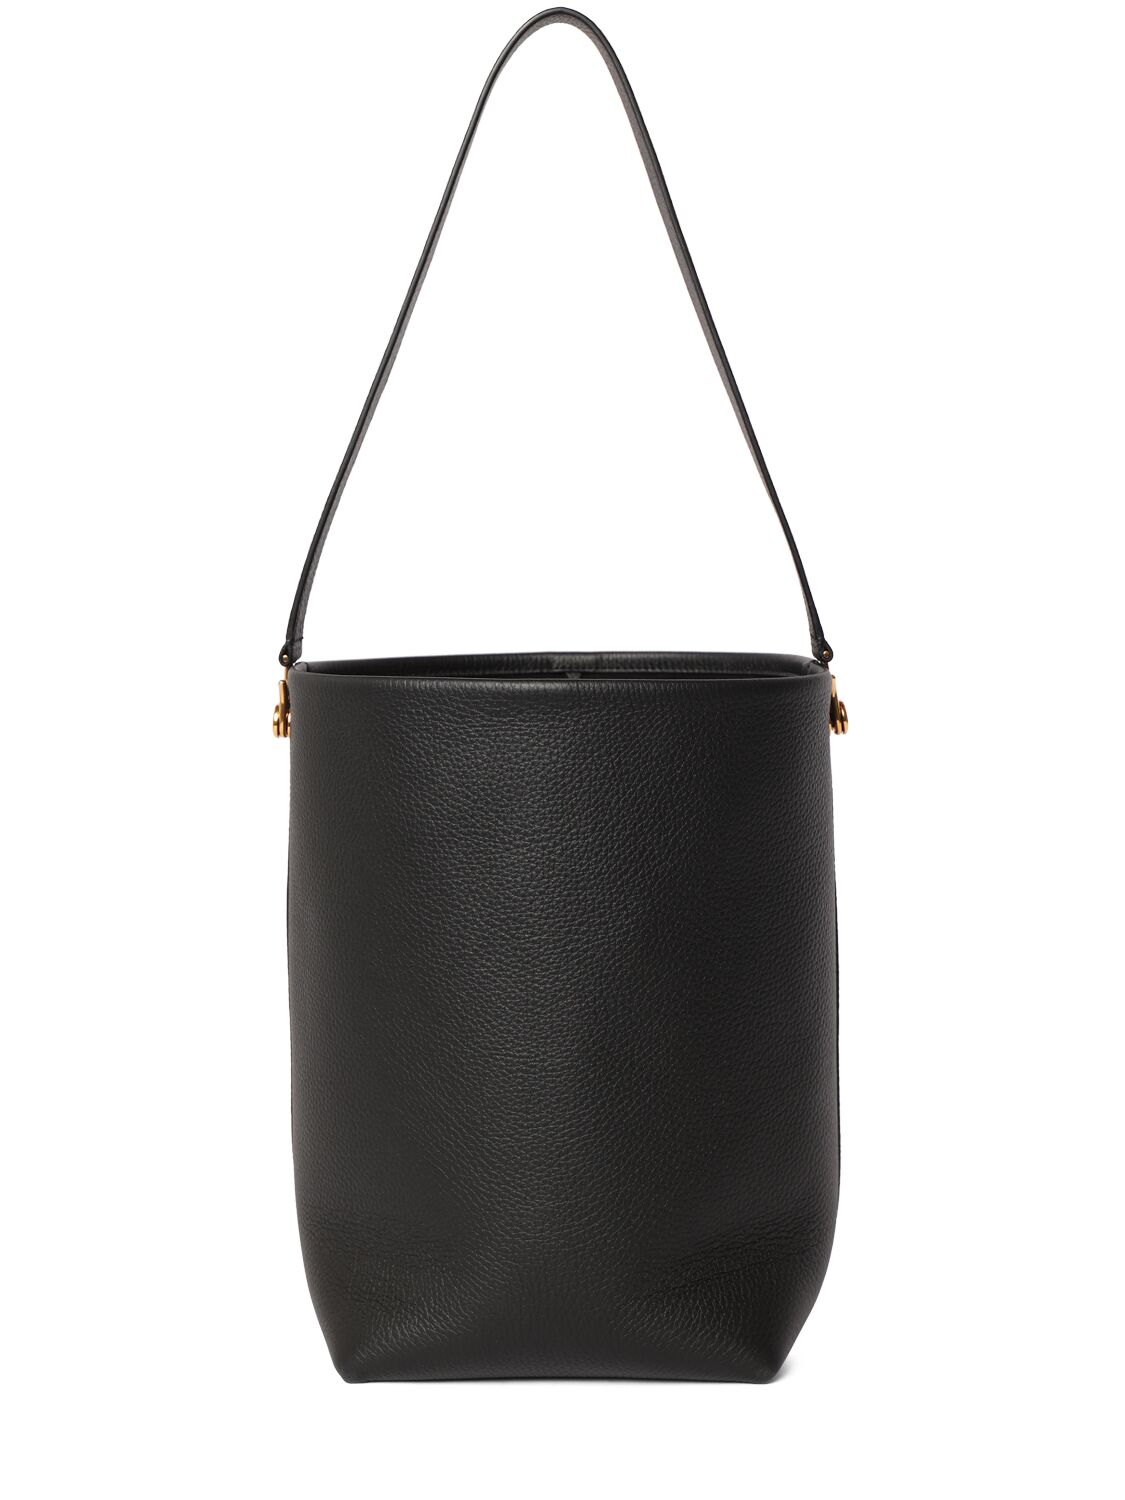 The Row Medium N/s Park Tote Grain Leather Bag In Black Ang